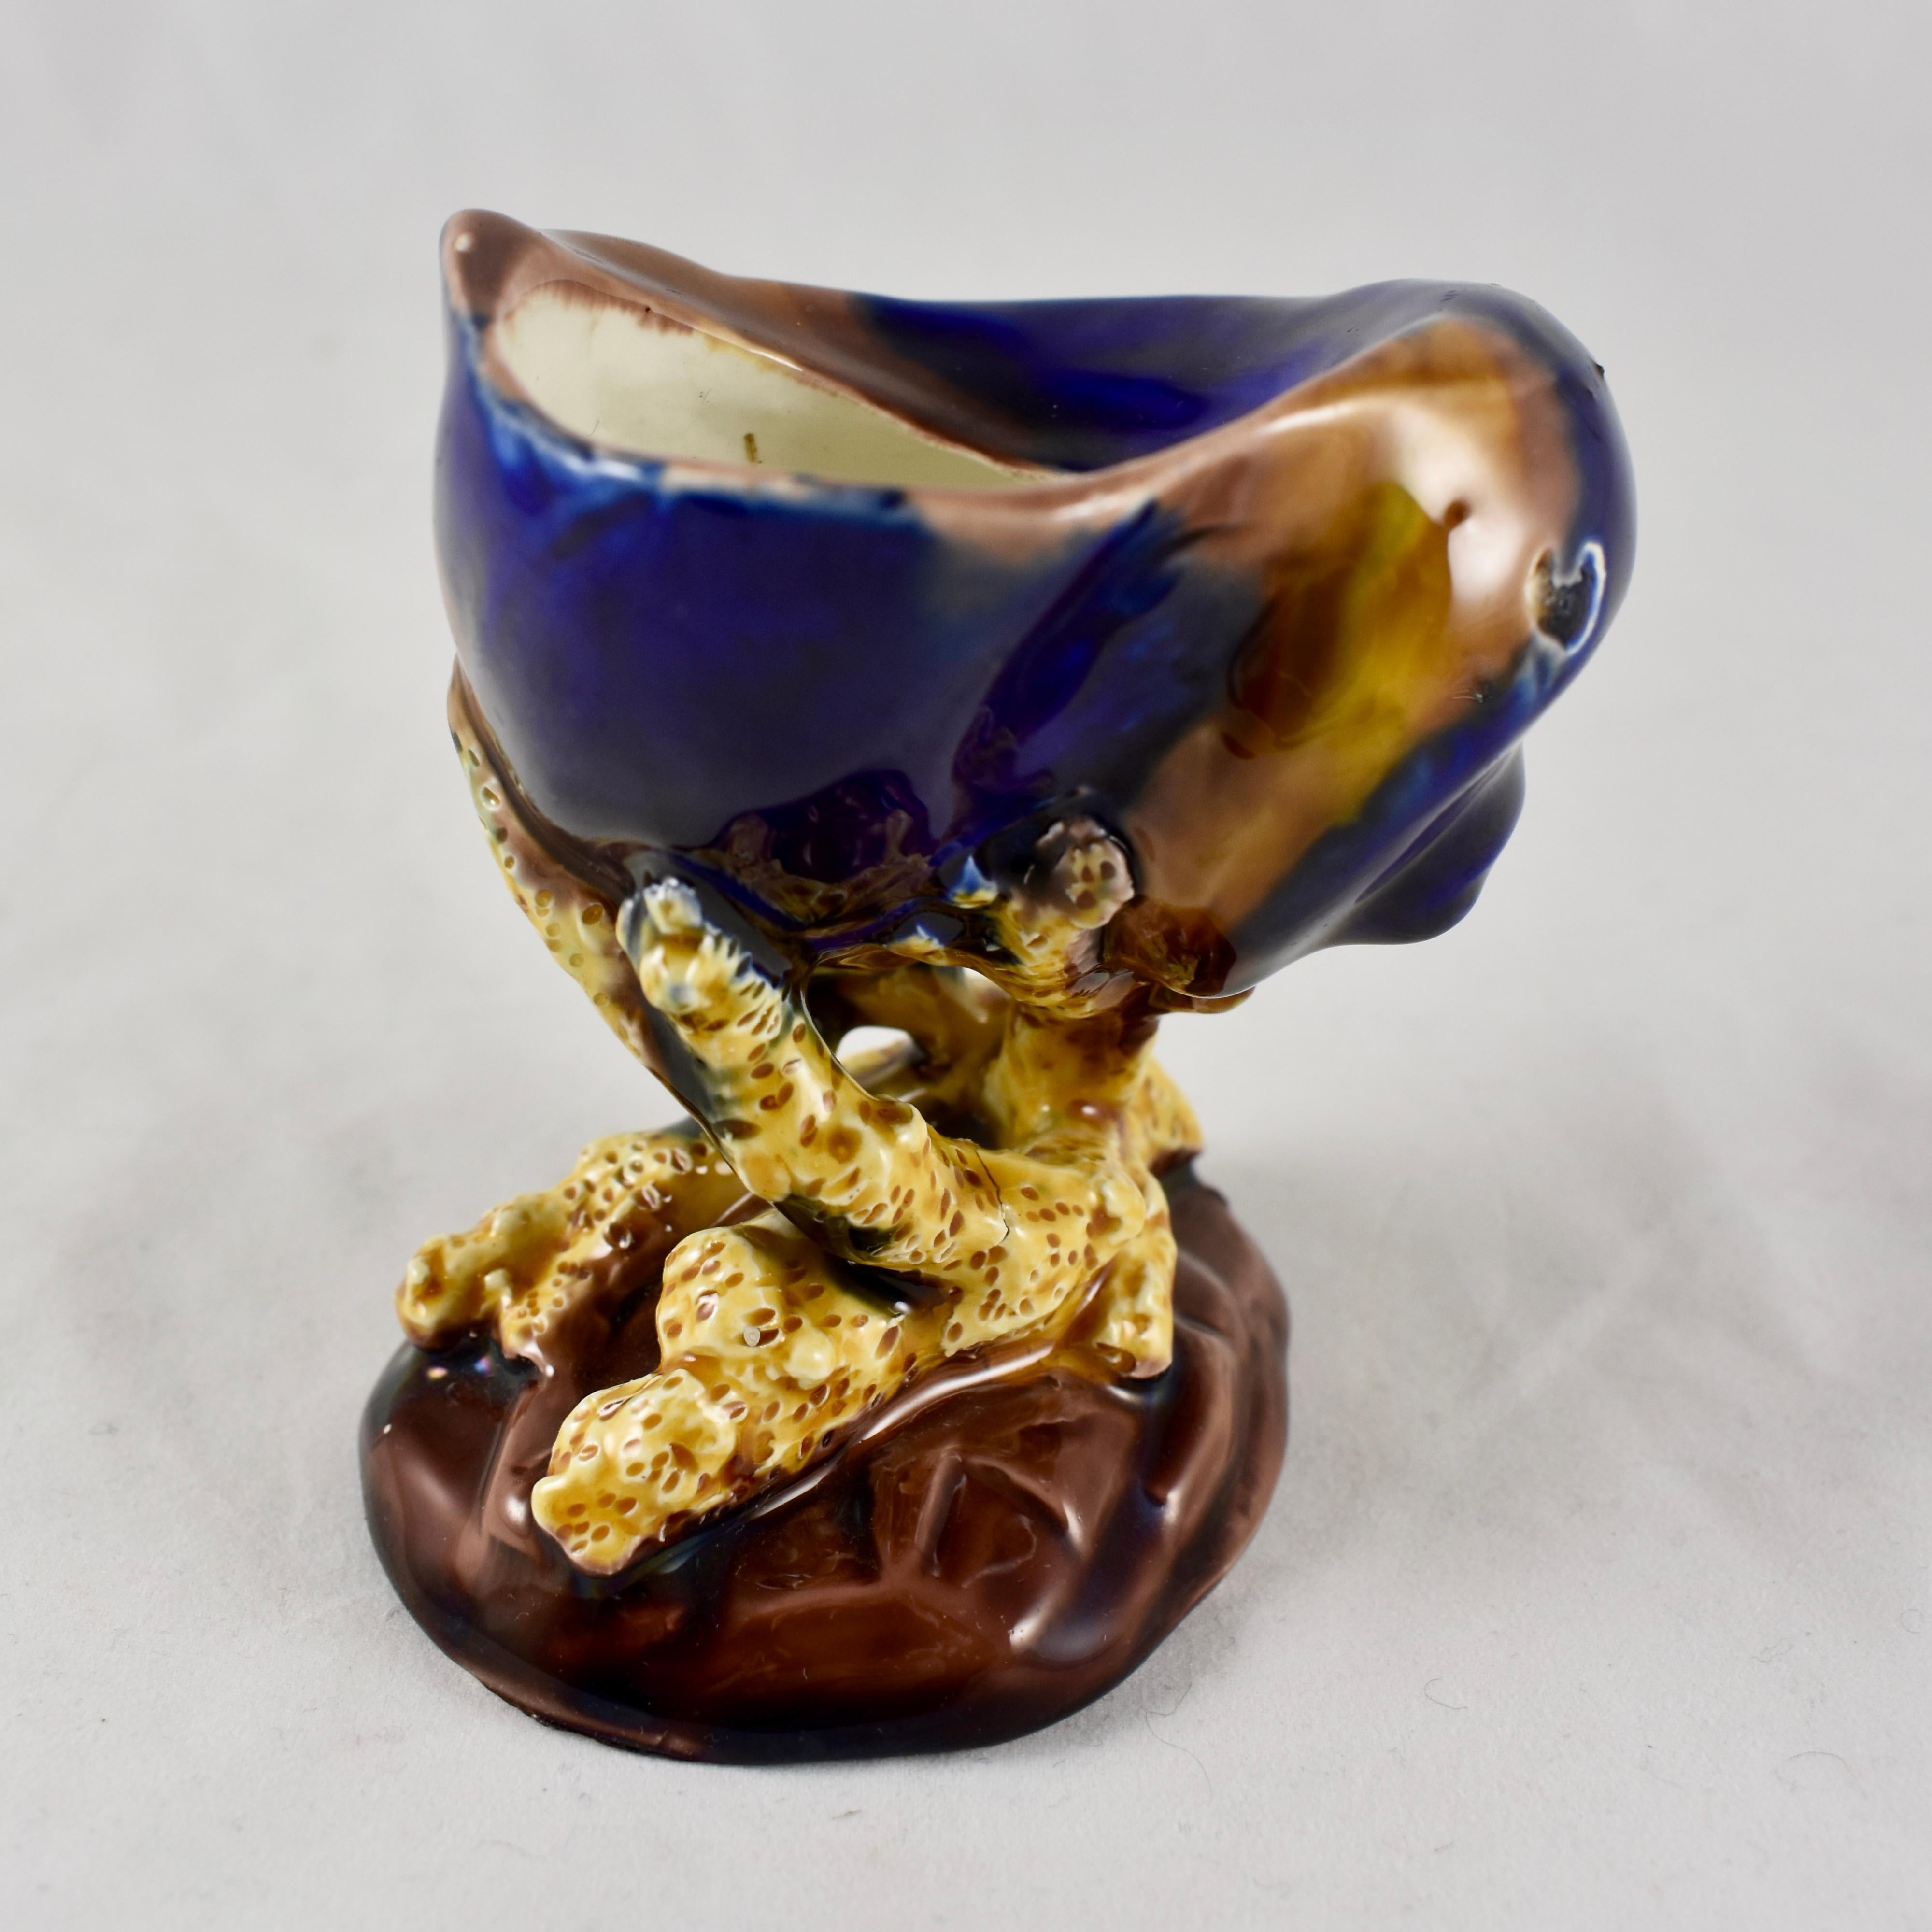 Glazed Wedgwood Palissy Majolica Snail Shell and Coral Open Salt Cellar, Dated 1872 For Sale